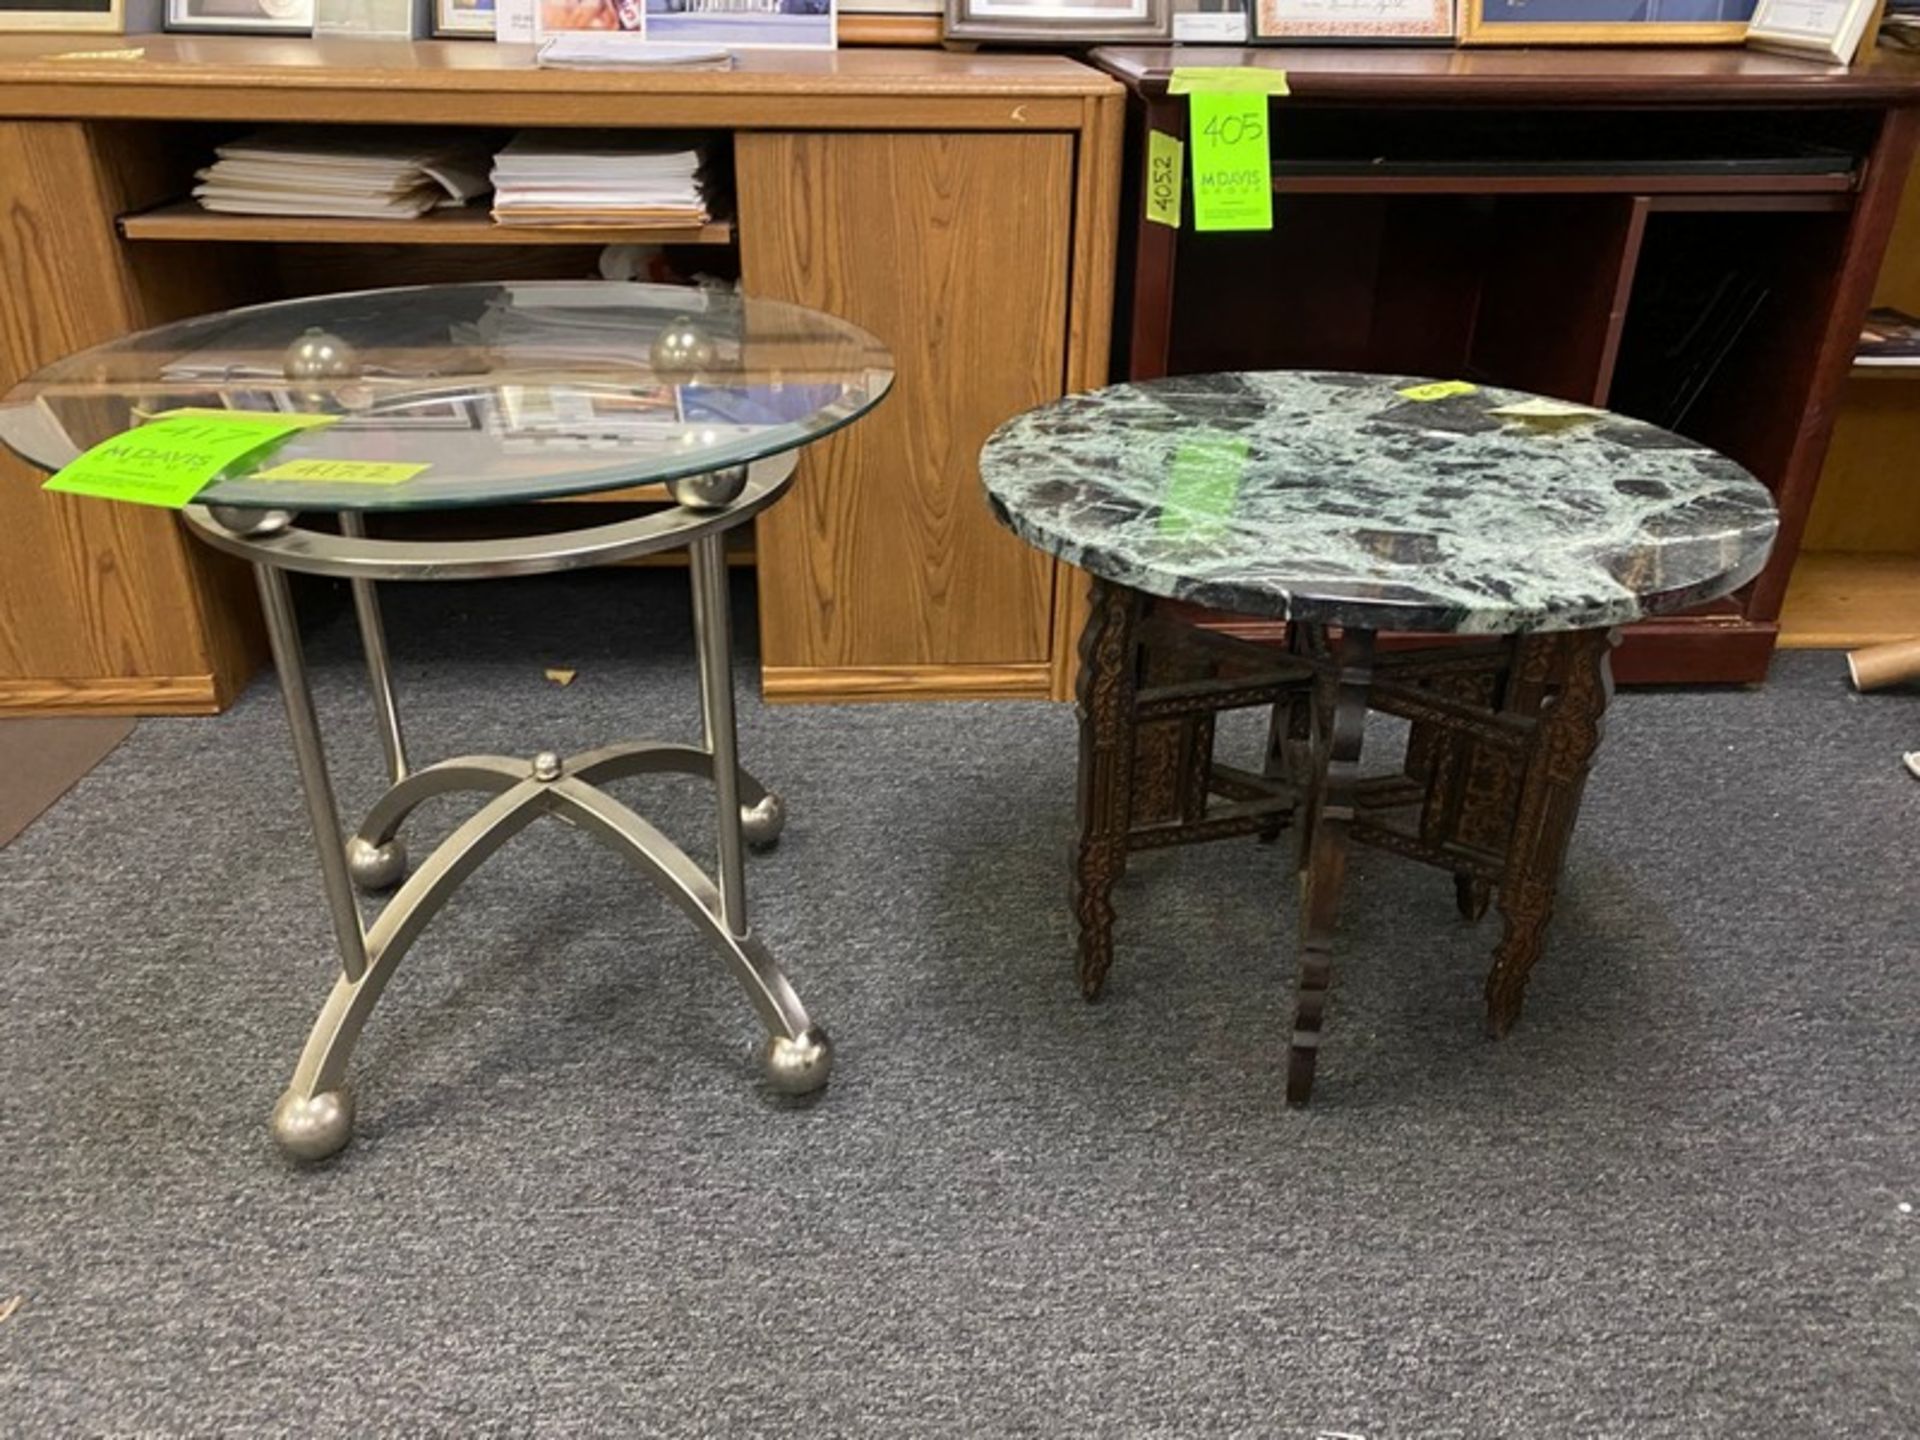 3 decorative round top end tables, one(1) granite top with hand-carved base - 24" diameter x 20"H